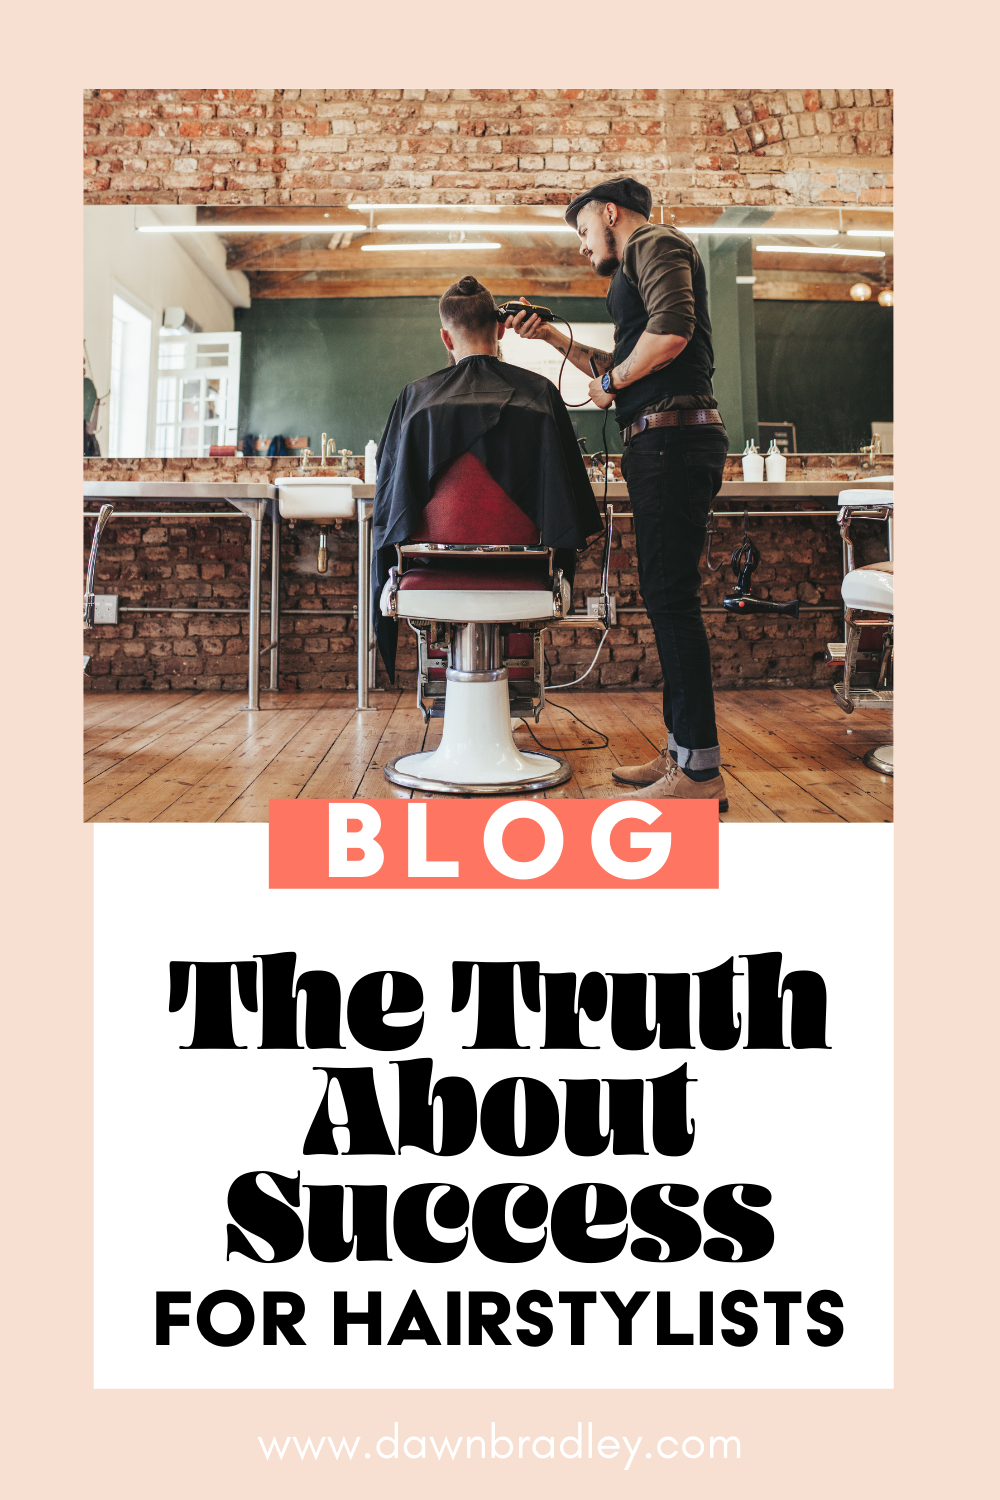 A barber stands at his chair wearing black pants and a vest. He is holding a pair of clippers to his clients head. We can see the back of the client in the chair. The text overlay reads "the truth about success for hairstylists"